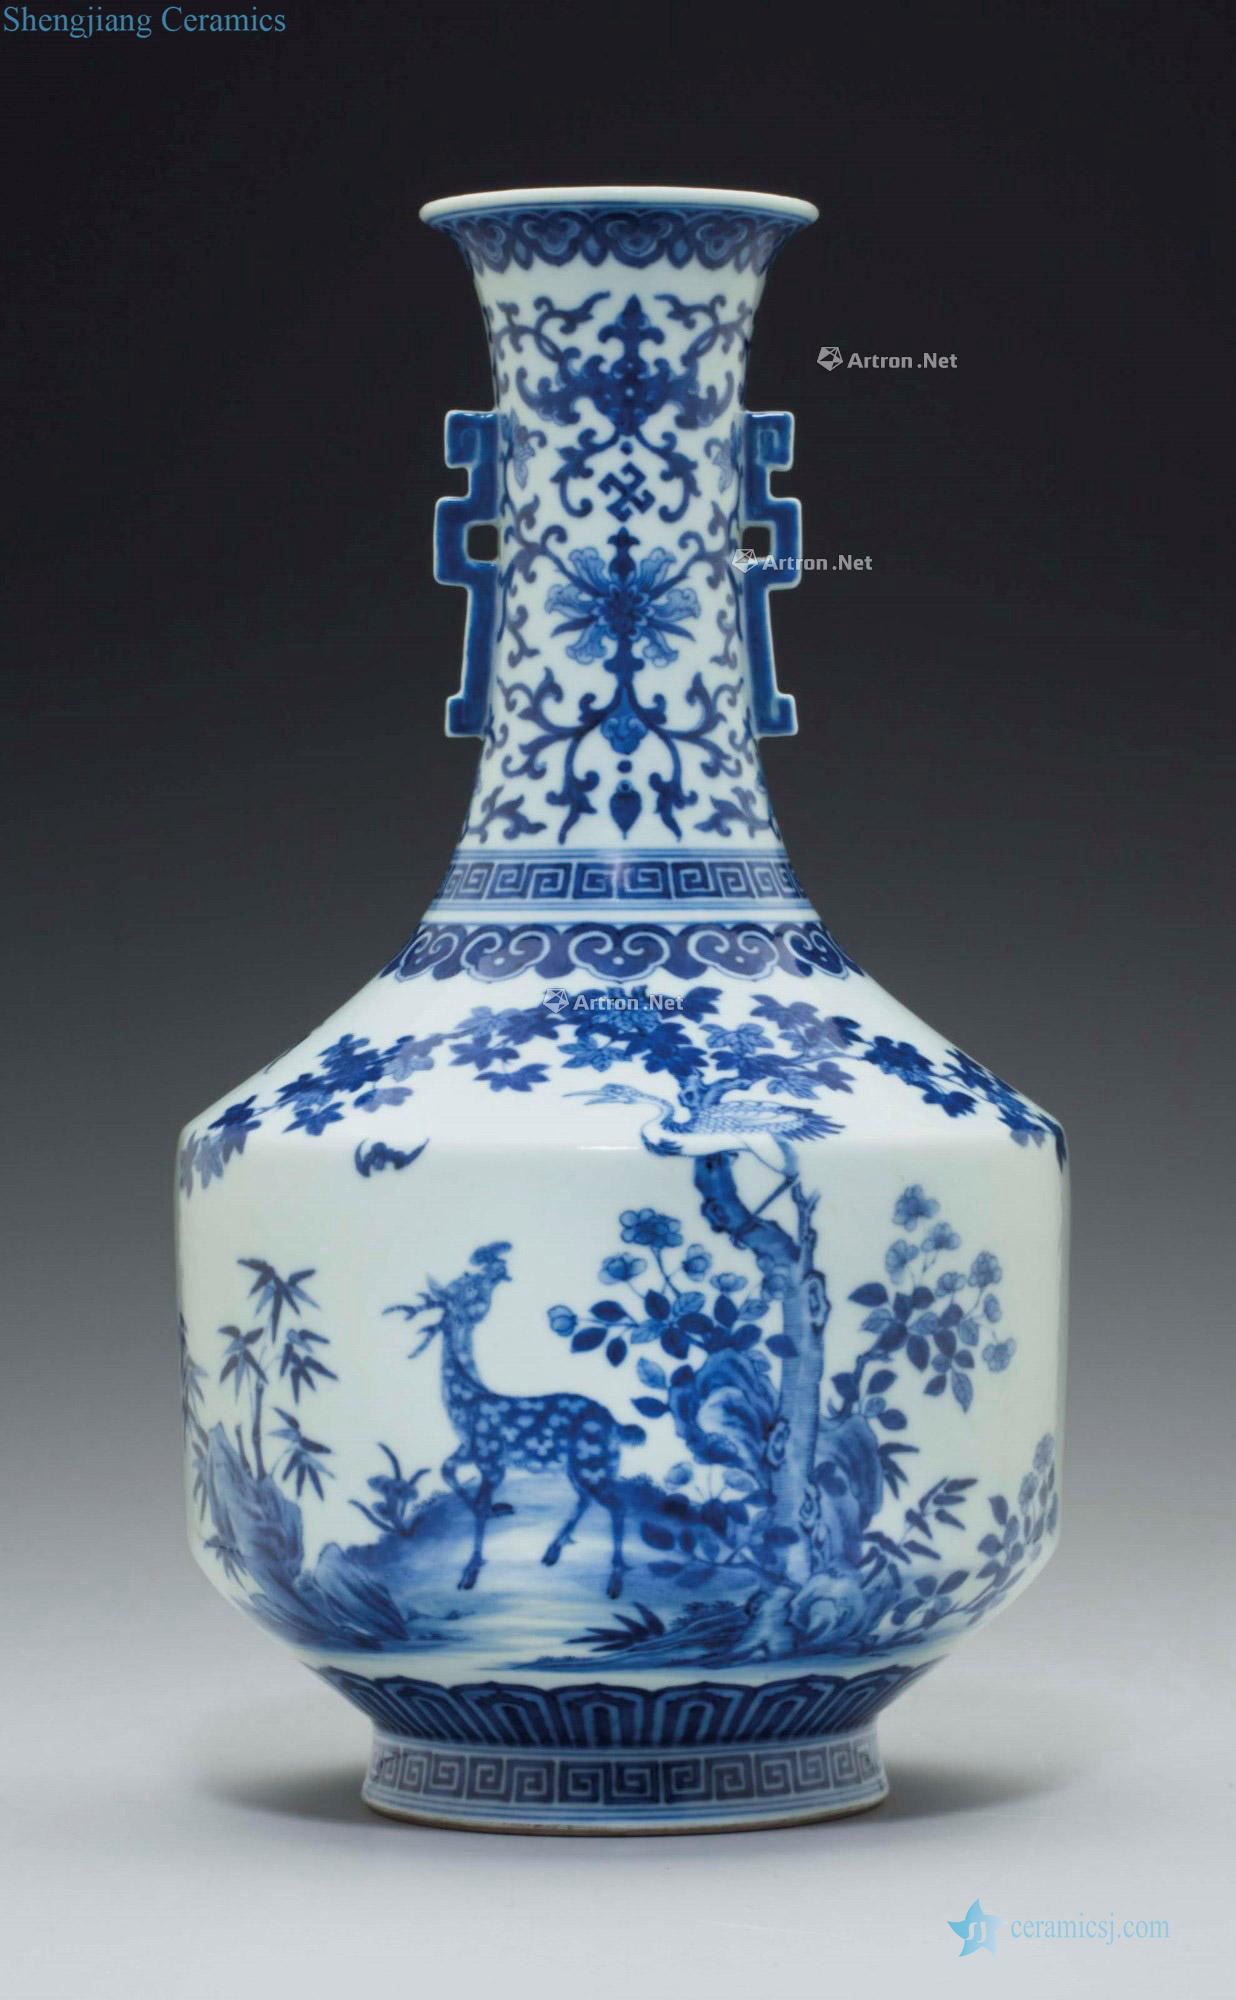 JIAQING SIX ~ CHARACTER SEAL MARK IN UNDERGLAZE BLUE AND OF THE PERIOD (1796 ~ 1796) is A RARE BLUE AND WHITE "DEER AND CRANE" VASE